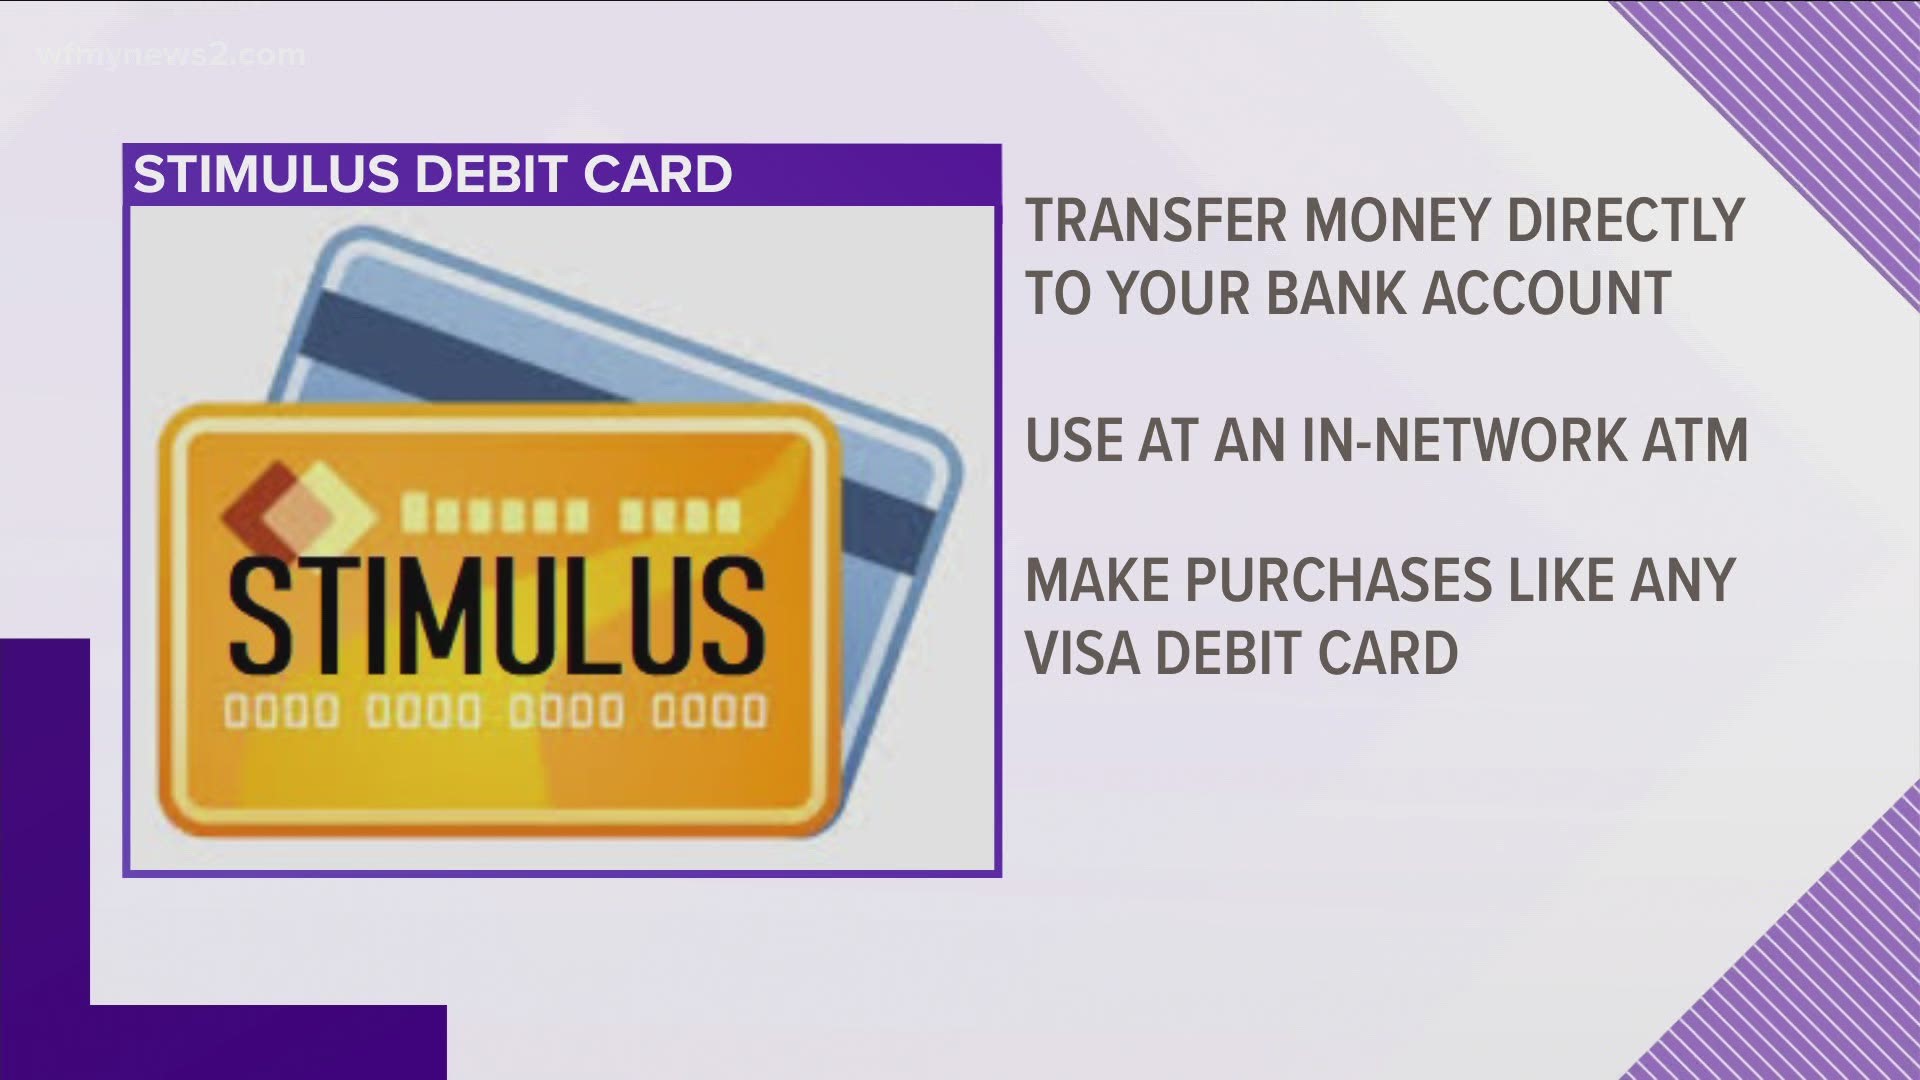 You can transfer the money directly to your bank, go to an ATM and get the money out, or use it as a debit card to make purchases.